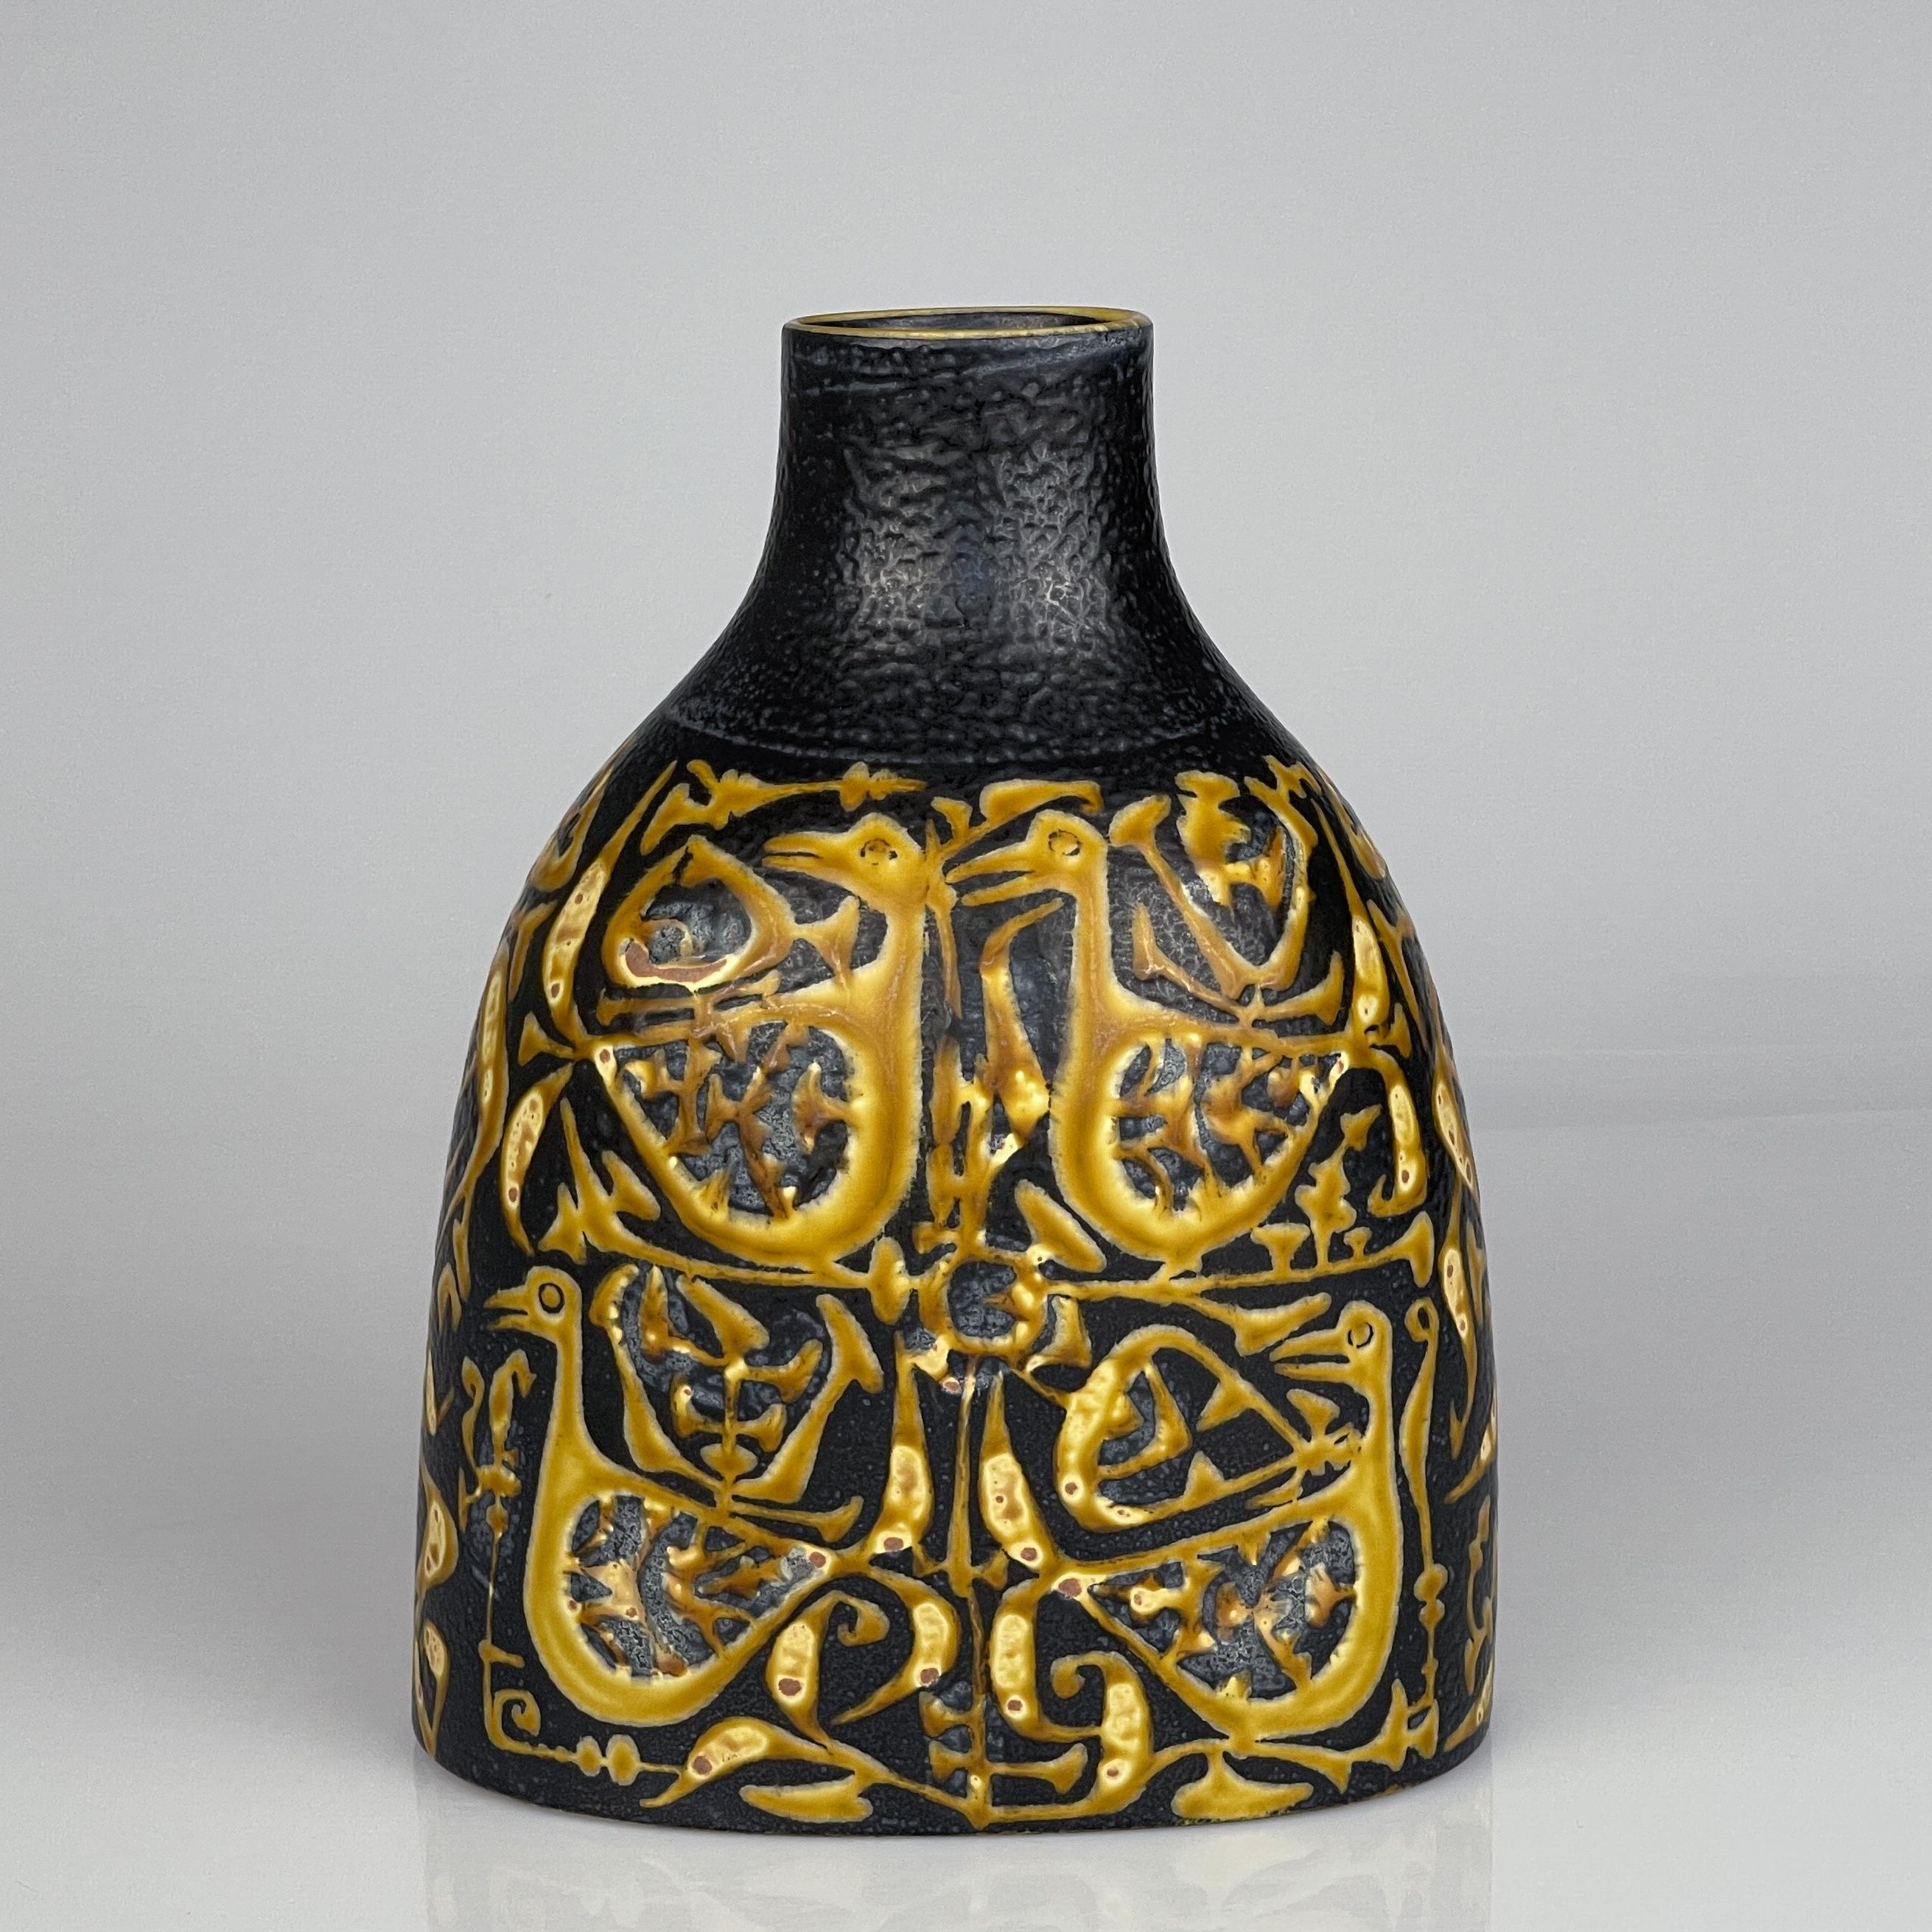 Scandinavian Modern Nils Thorsson Stoneware Baca vase Aluminia Denmark ca 1965

Description
A stoneware vase decorated with yellow stylised birds on a tactile brown glazed surface.

Both the decoration (model 714) as the form of this vase (model